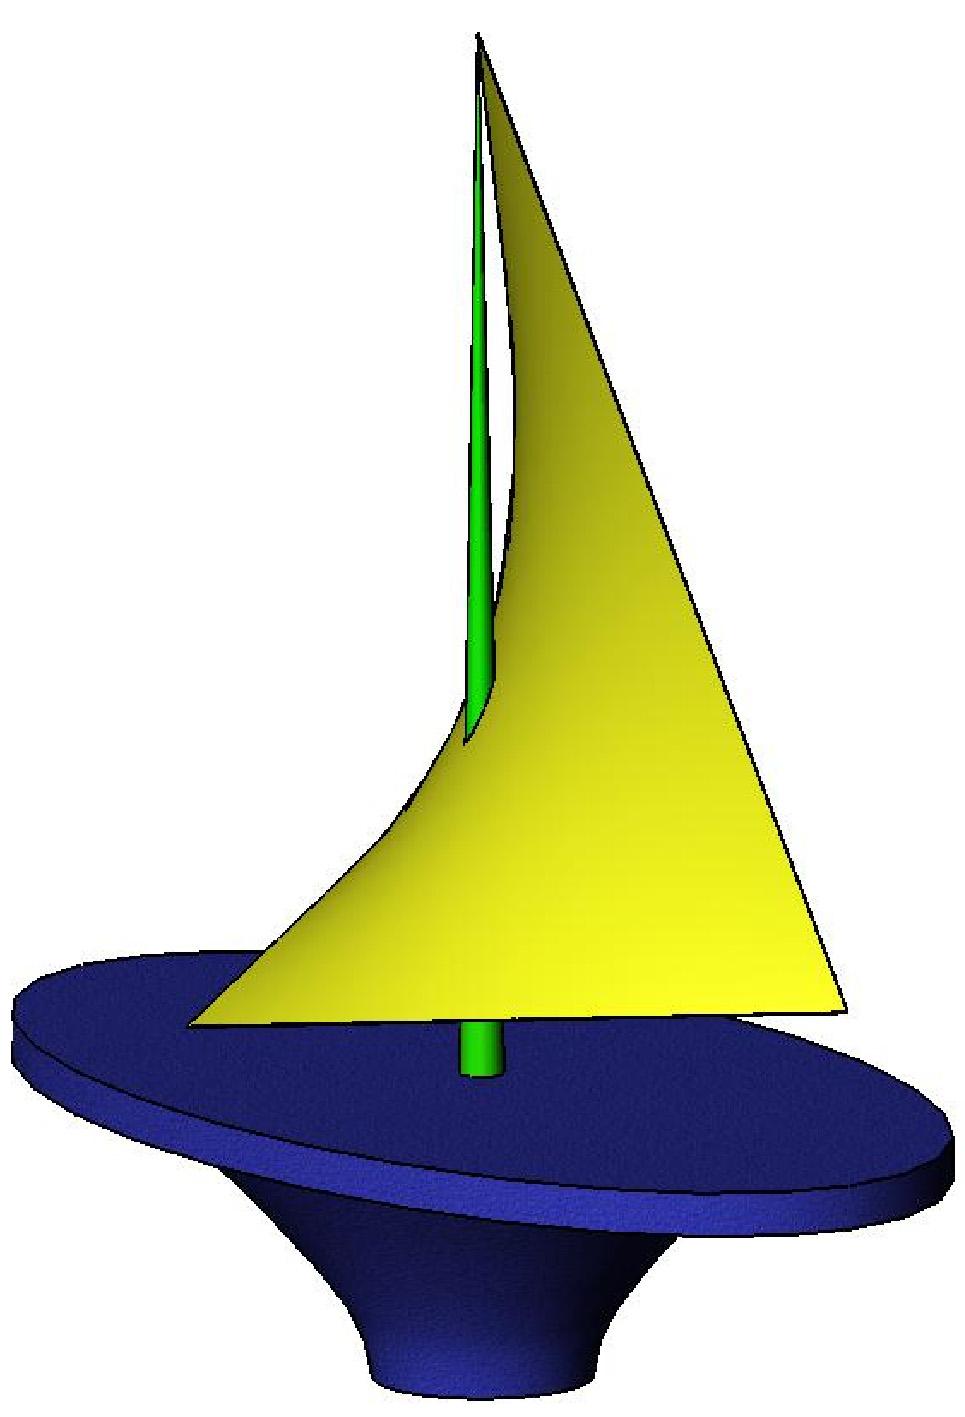 Structural Forms C-2. The 3D graphic on the right shows a trophy for a sailing competition which is in the form of a yacht. The projections of the trophy are shown in Fig. C-2. The stand is a semi hyperboloid of revolution and the deck is elliptical.